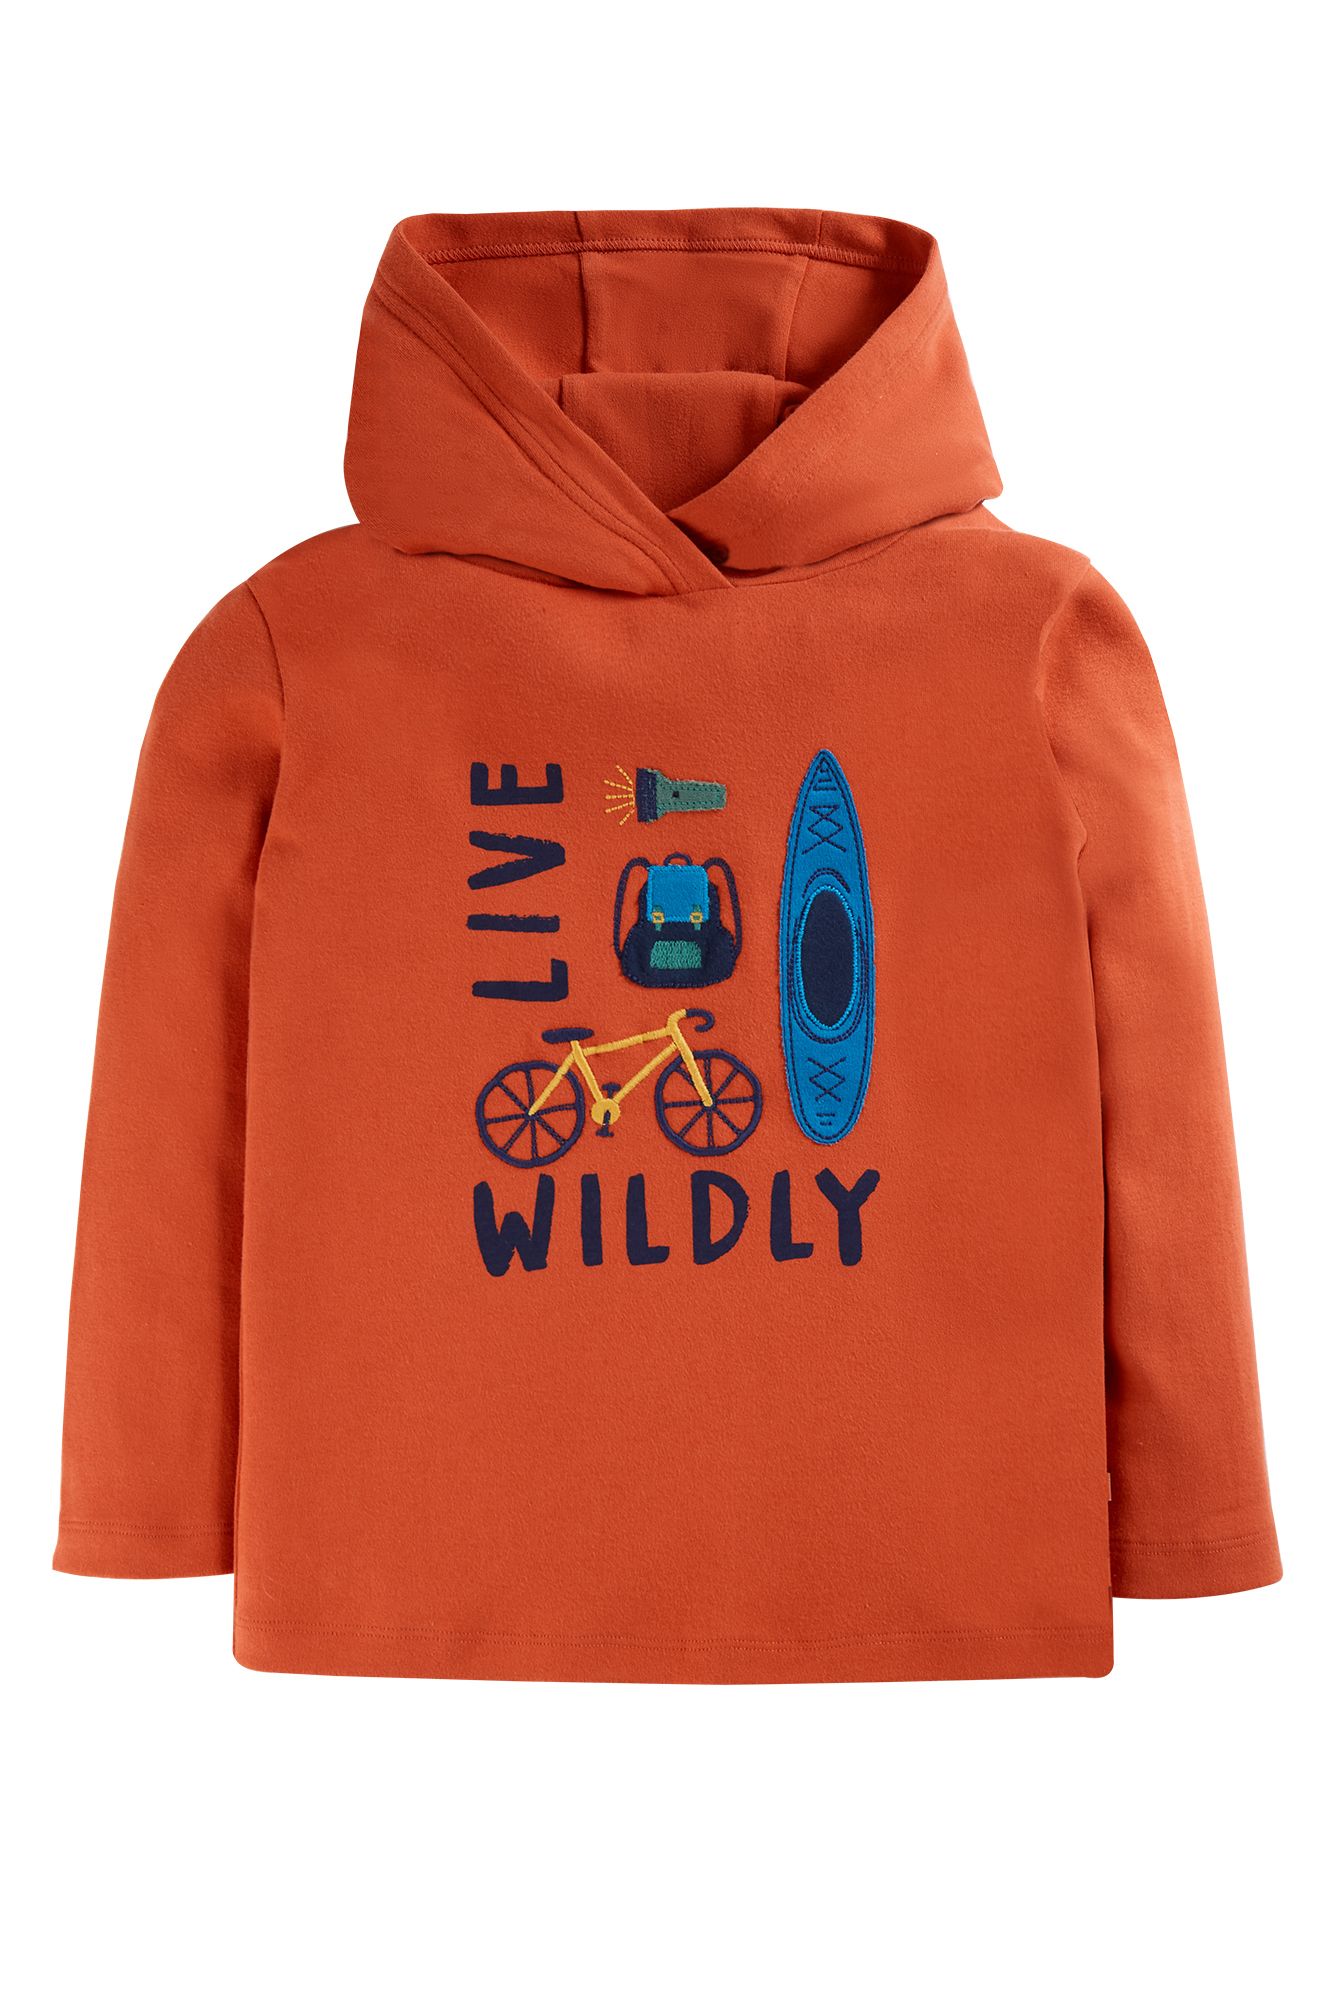 Campfire Hooded Top